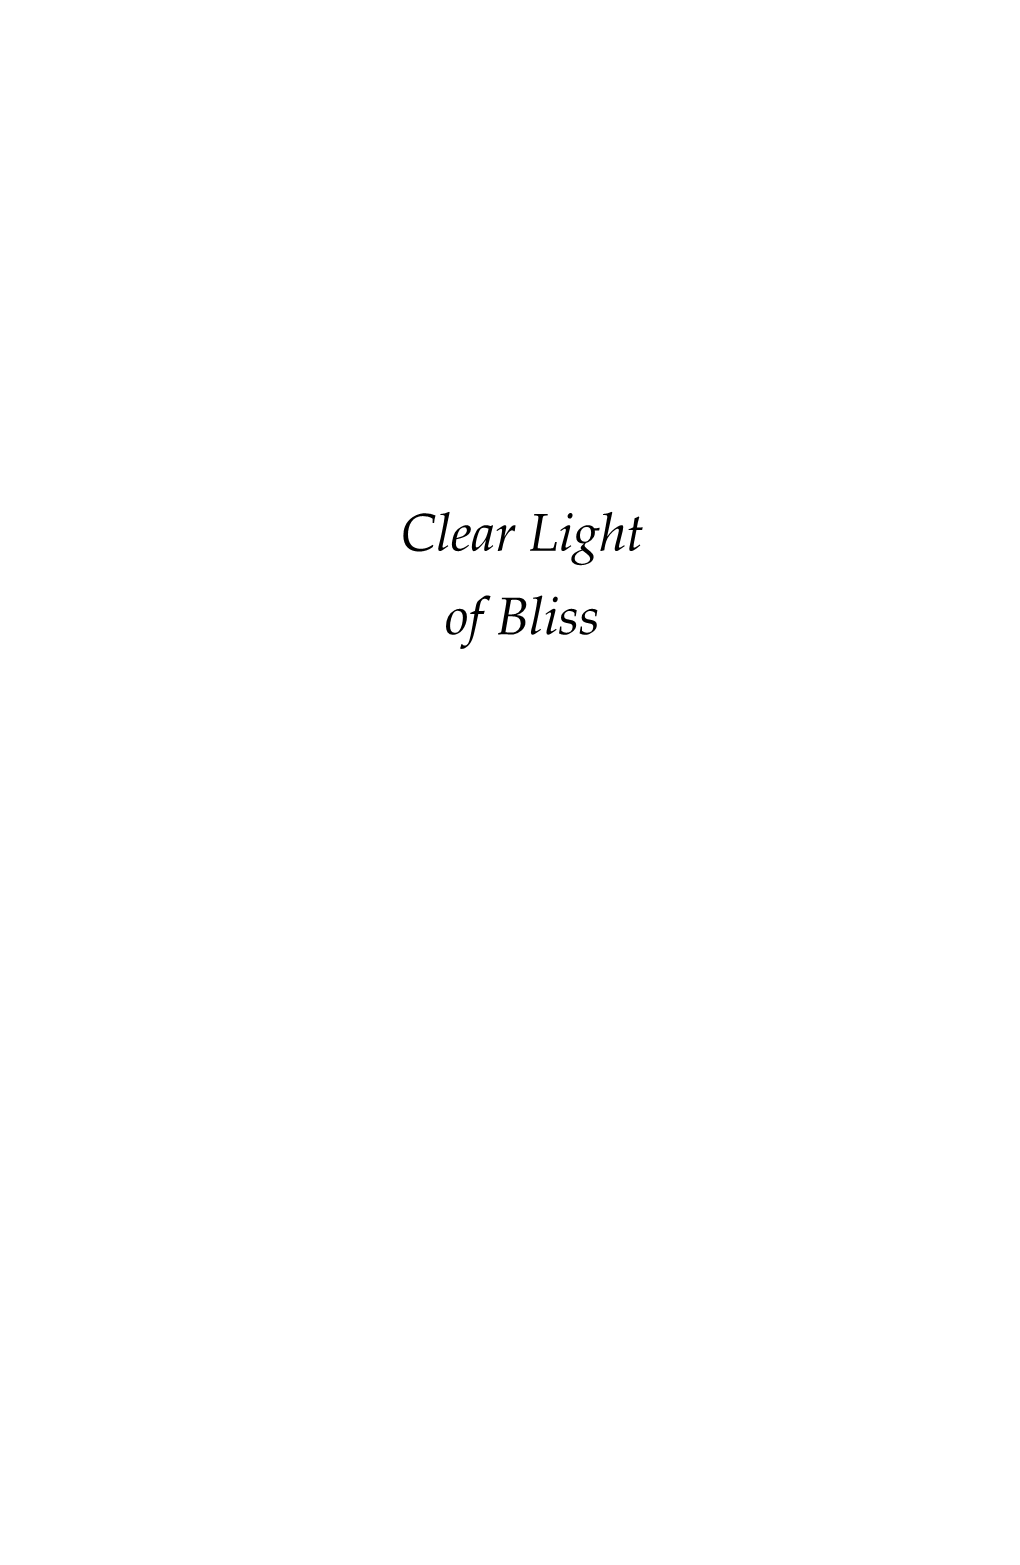 Clear Light of Bliss Also by Geshe Kelsang Gyatso